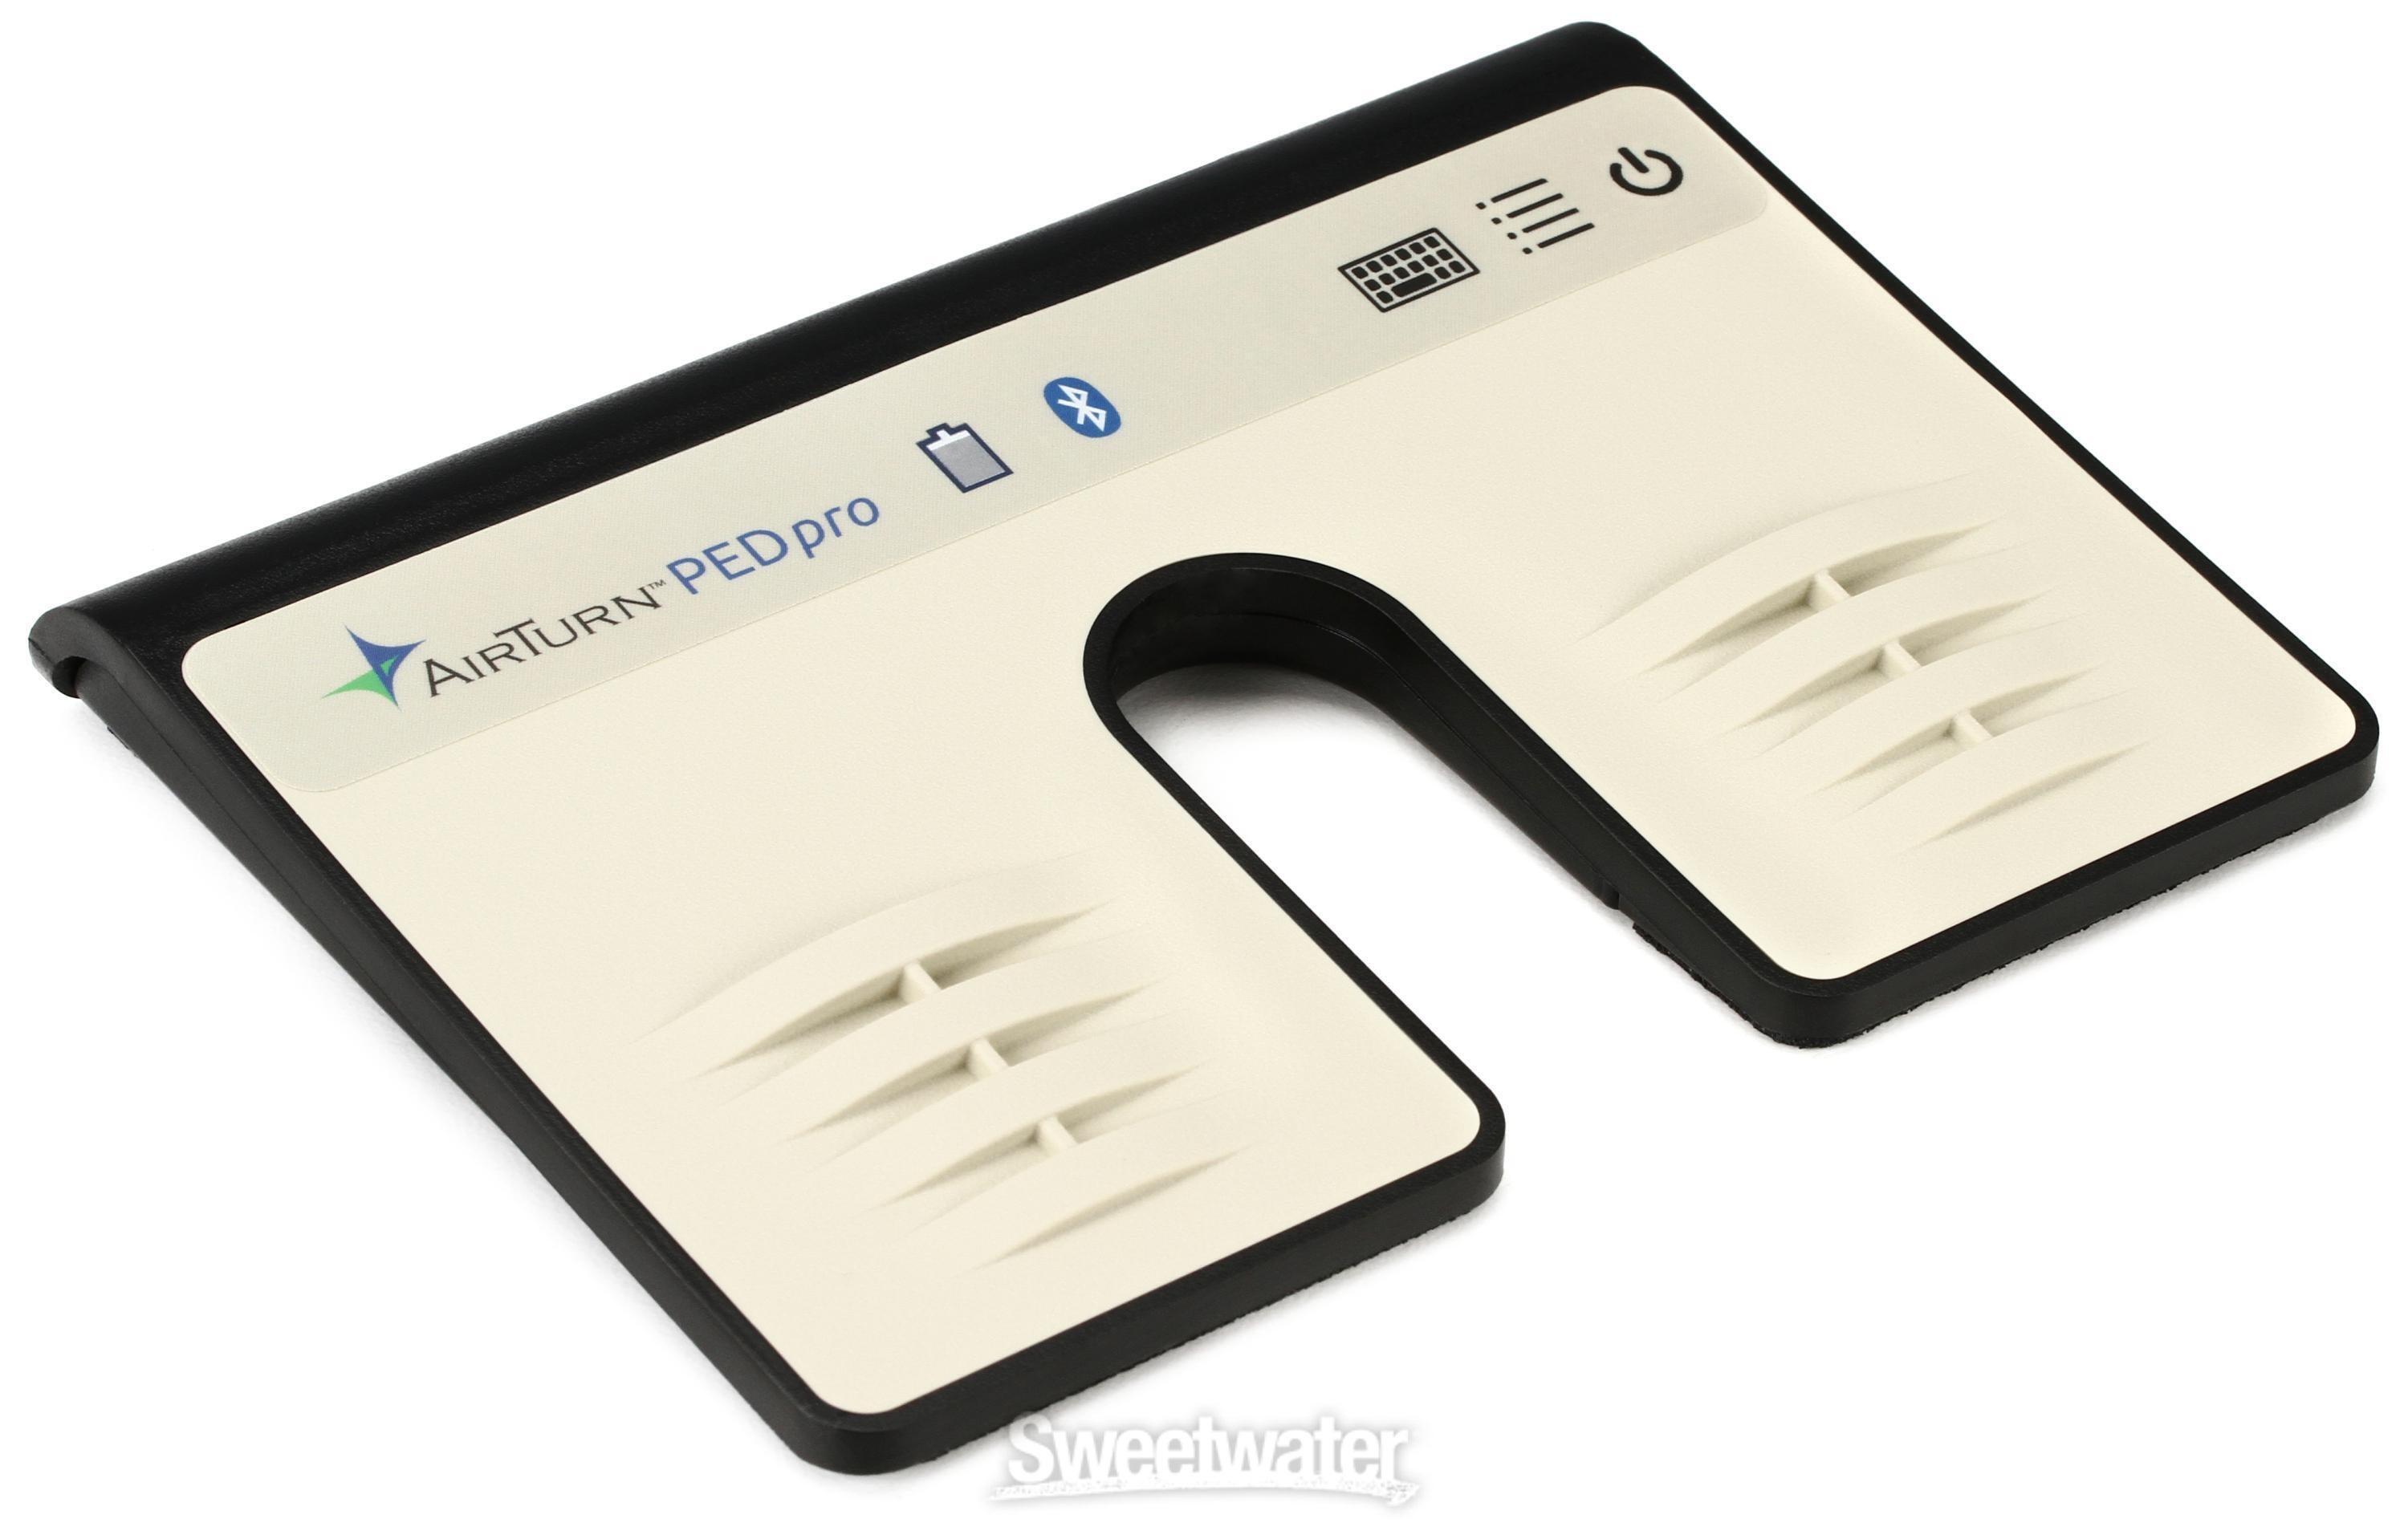 AirTurn PEDpro Bluetooth Foot Controller Reviews | Sweetwater